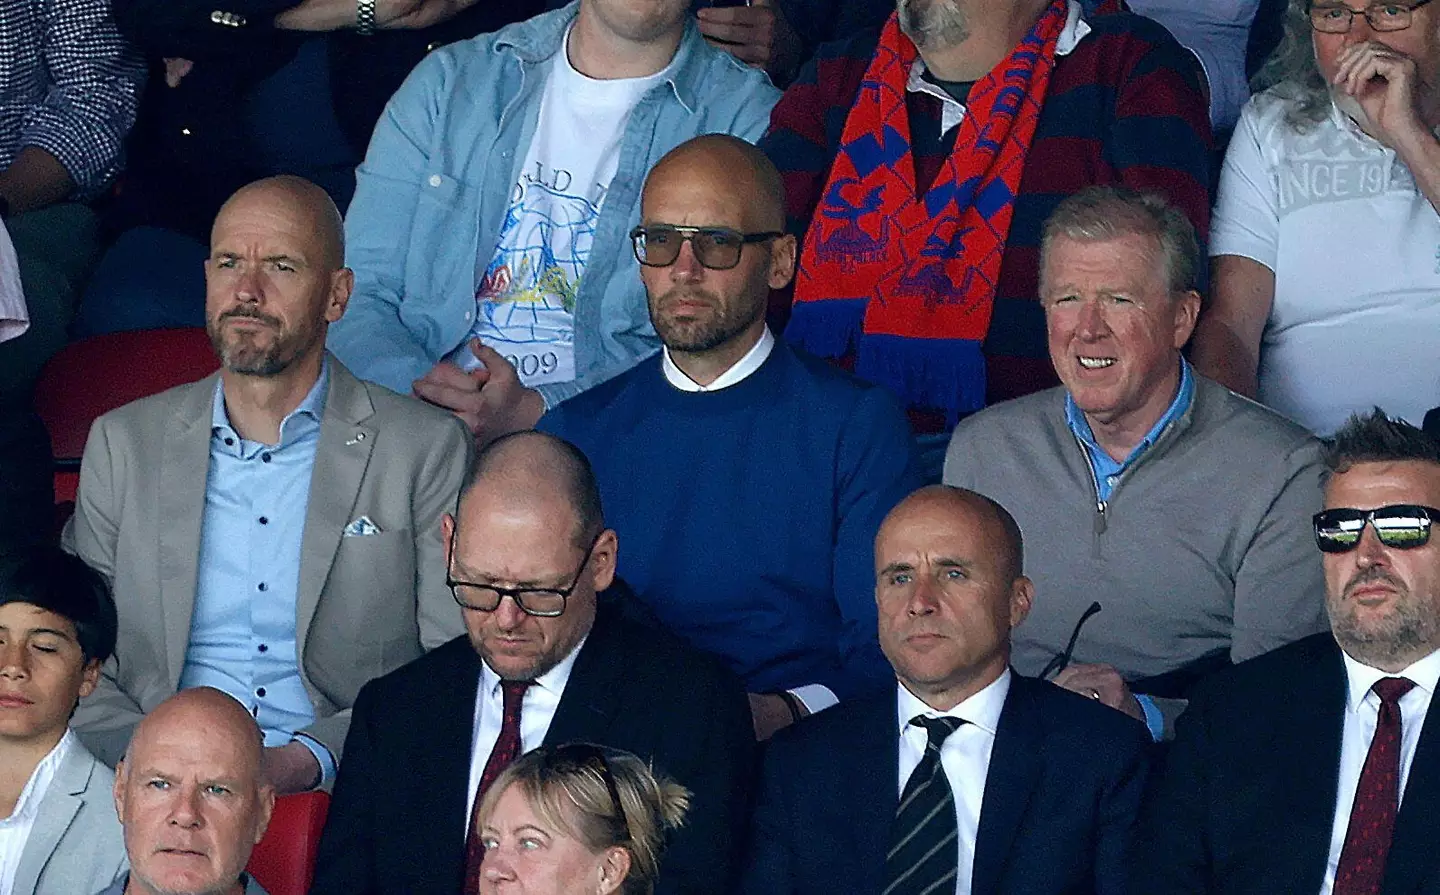 Erik ten Hag, Mitchell van der Gaag and Steve McClaren in attendence to watch Manchester United face Crystal Palace at Selhurst Park |